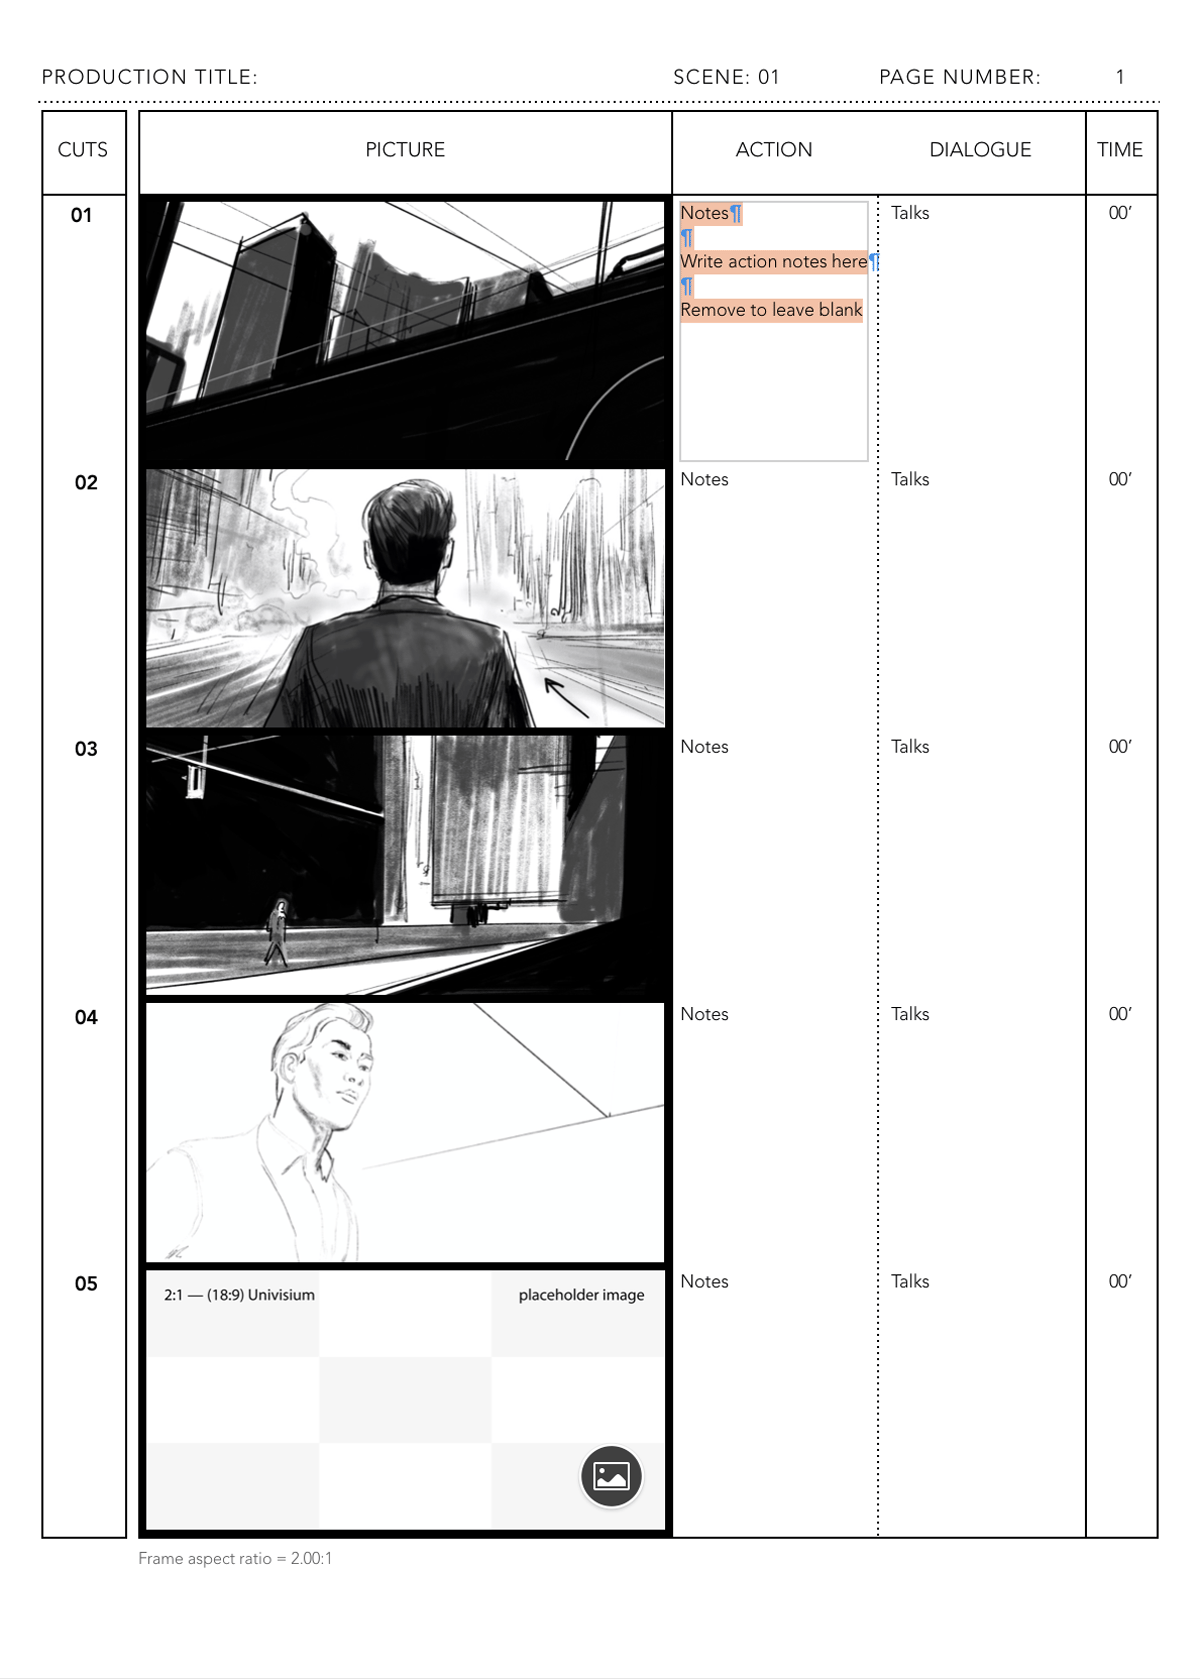 Storyboard template for 2.39:1 (scope) anime films (Japanese version)